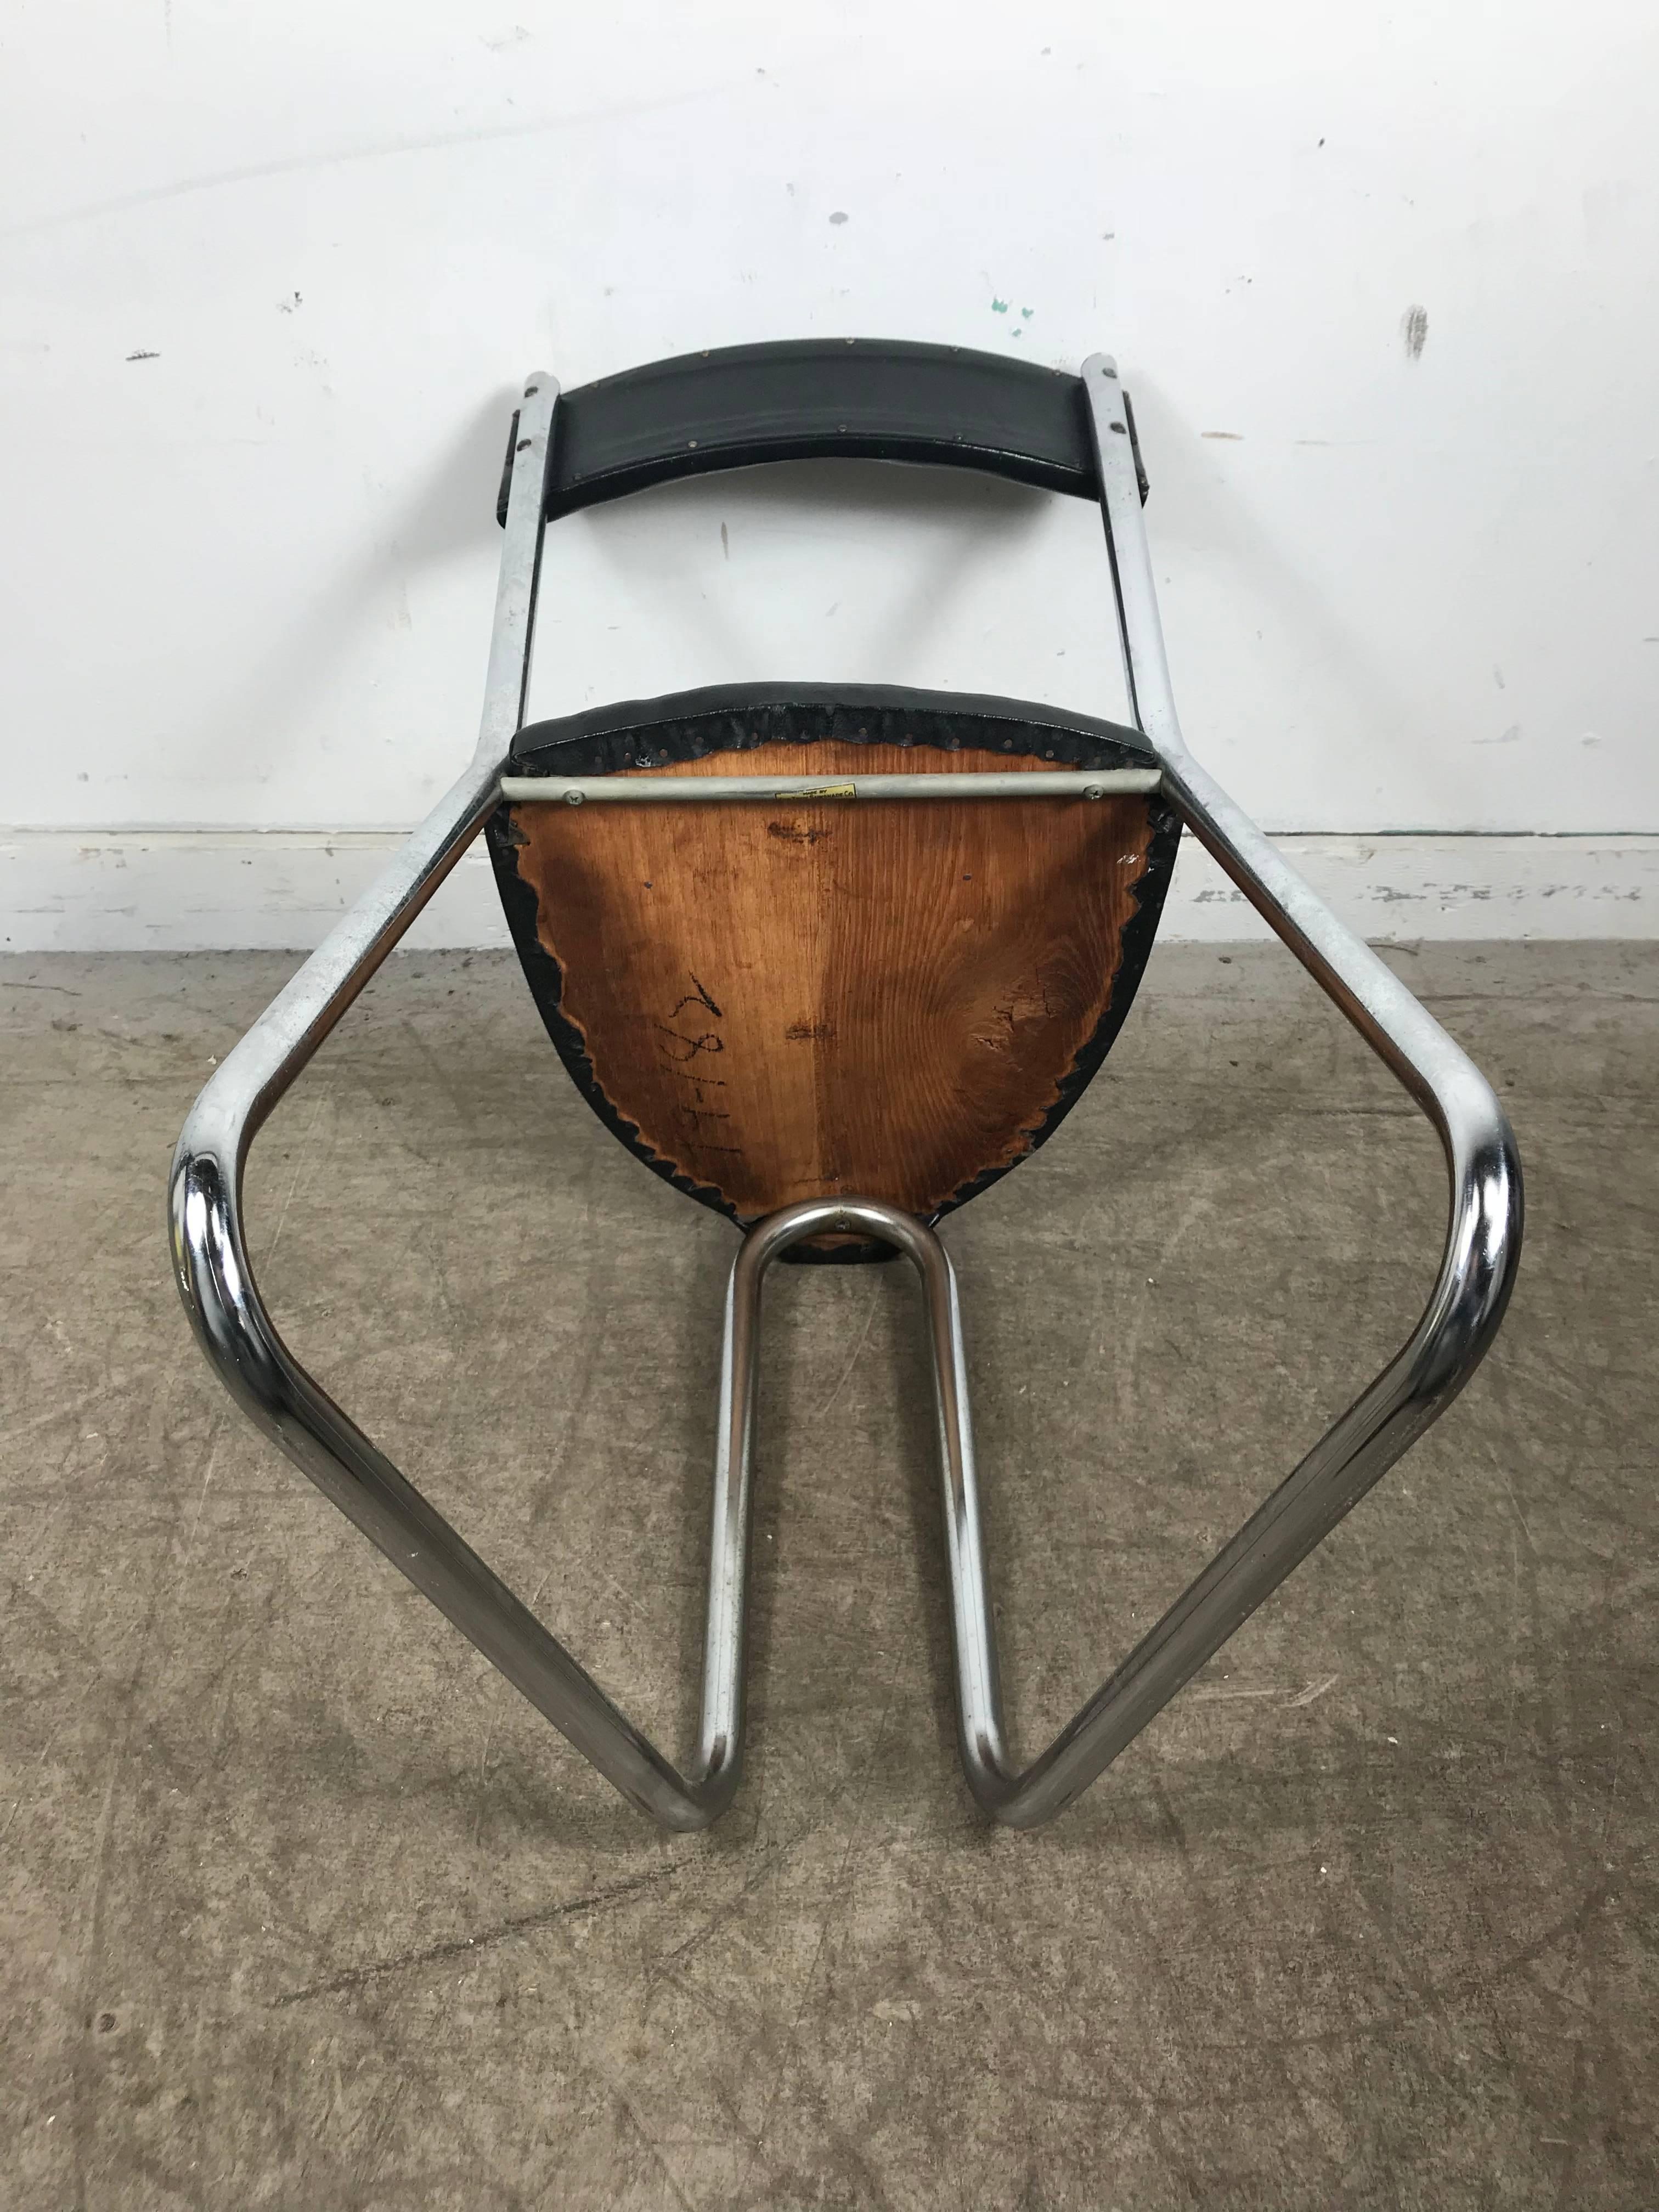 Unusual Art Deco Machine Age side chair / vanity stool designed by Gilbert Rhode for Troy Sunshade company, black oil cloth and tubular chrome. Amazing original condition, retains early Troy Sunshade label.